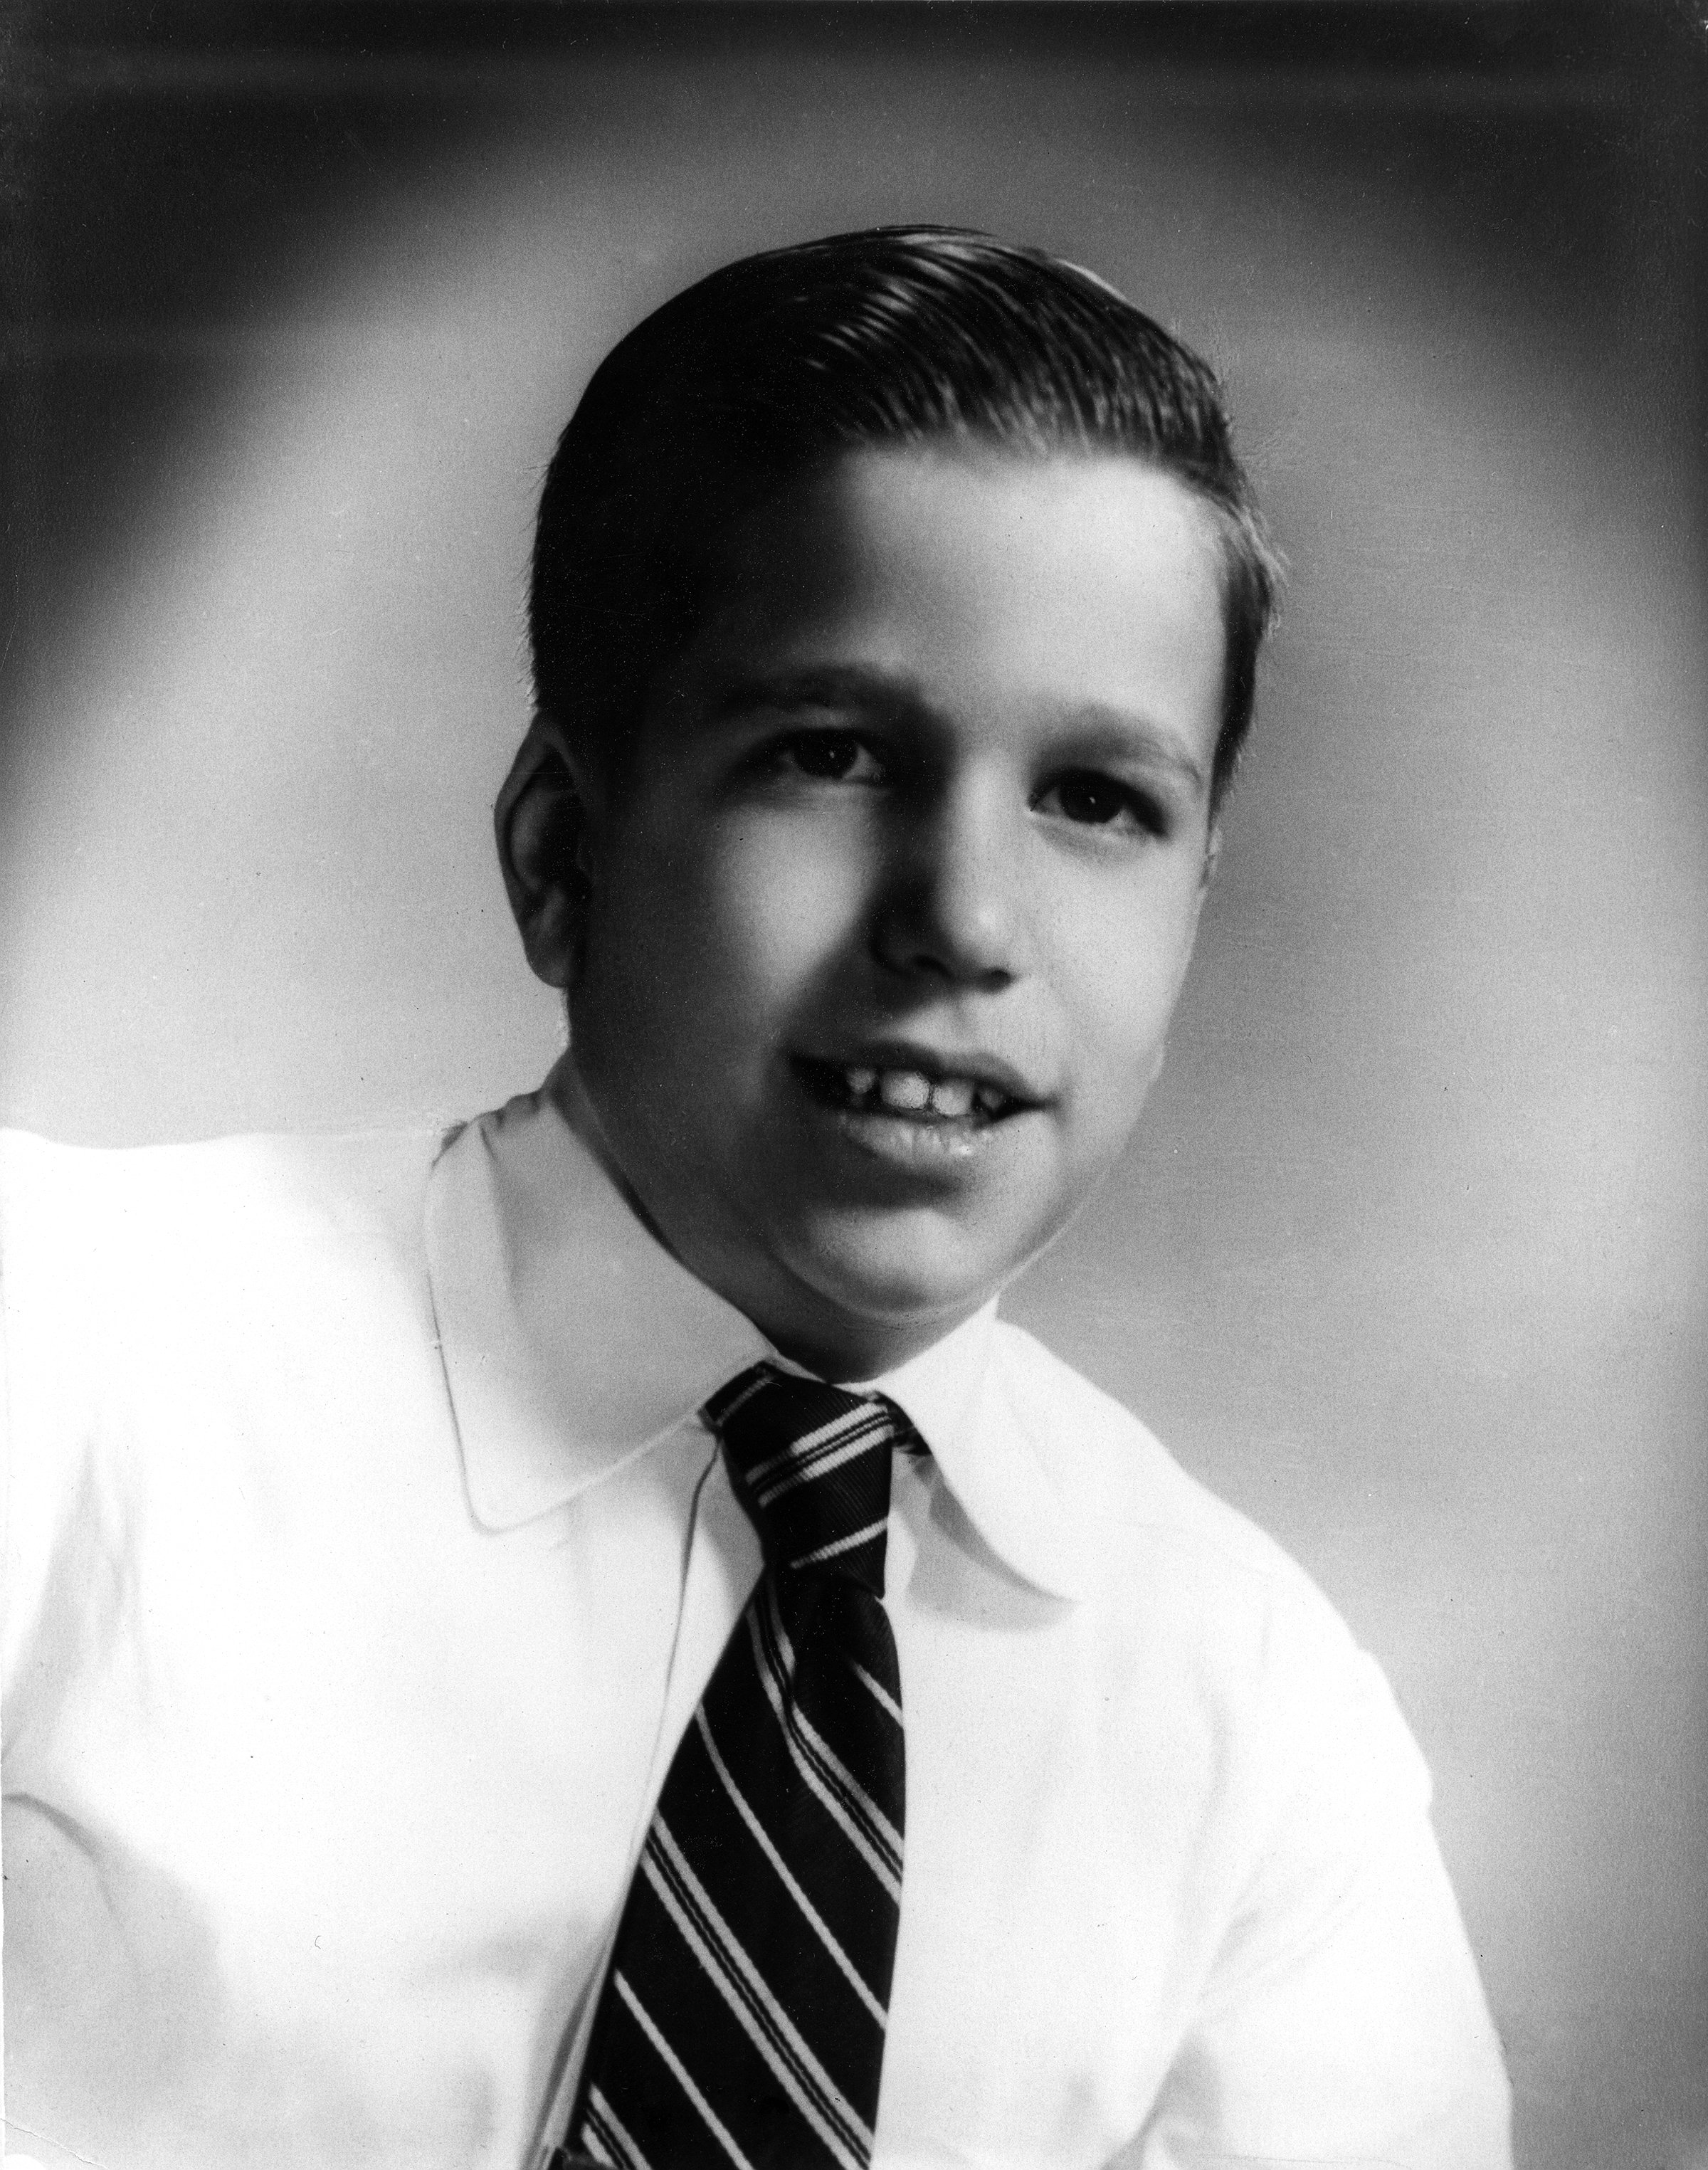 A photo of Henry Winkler as a child